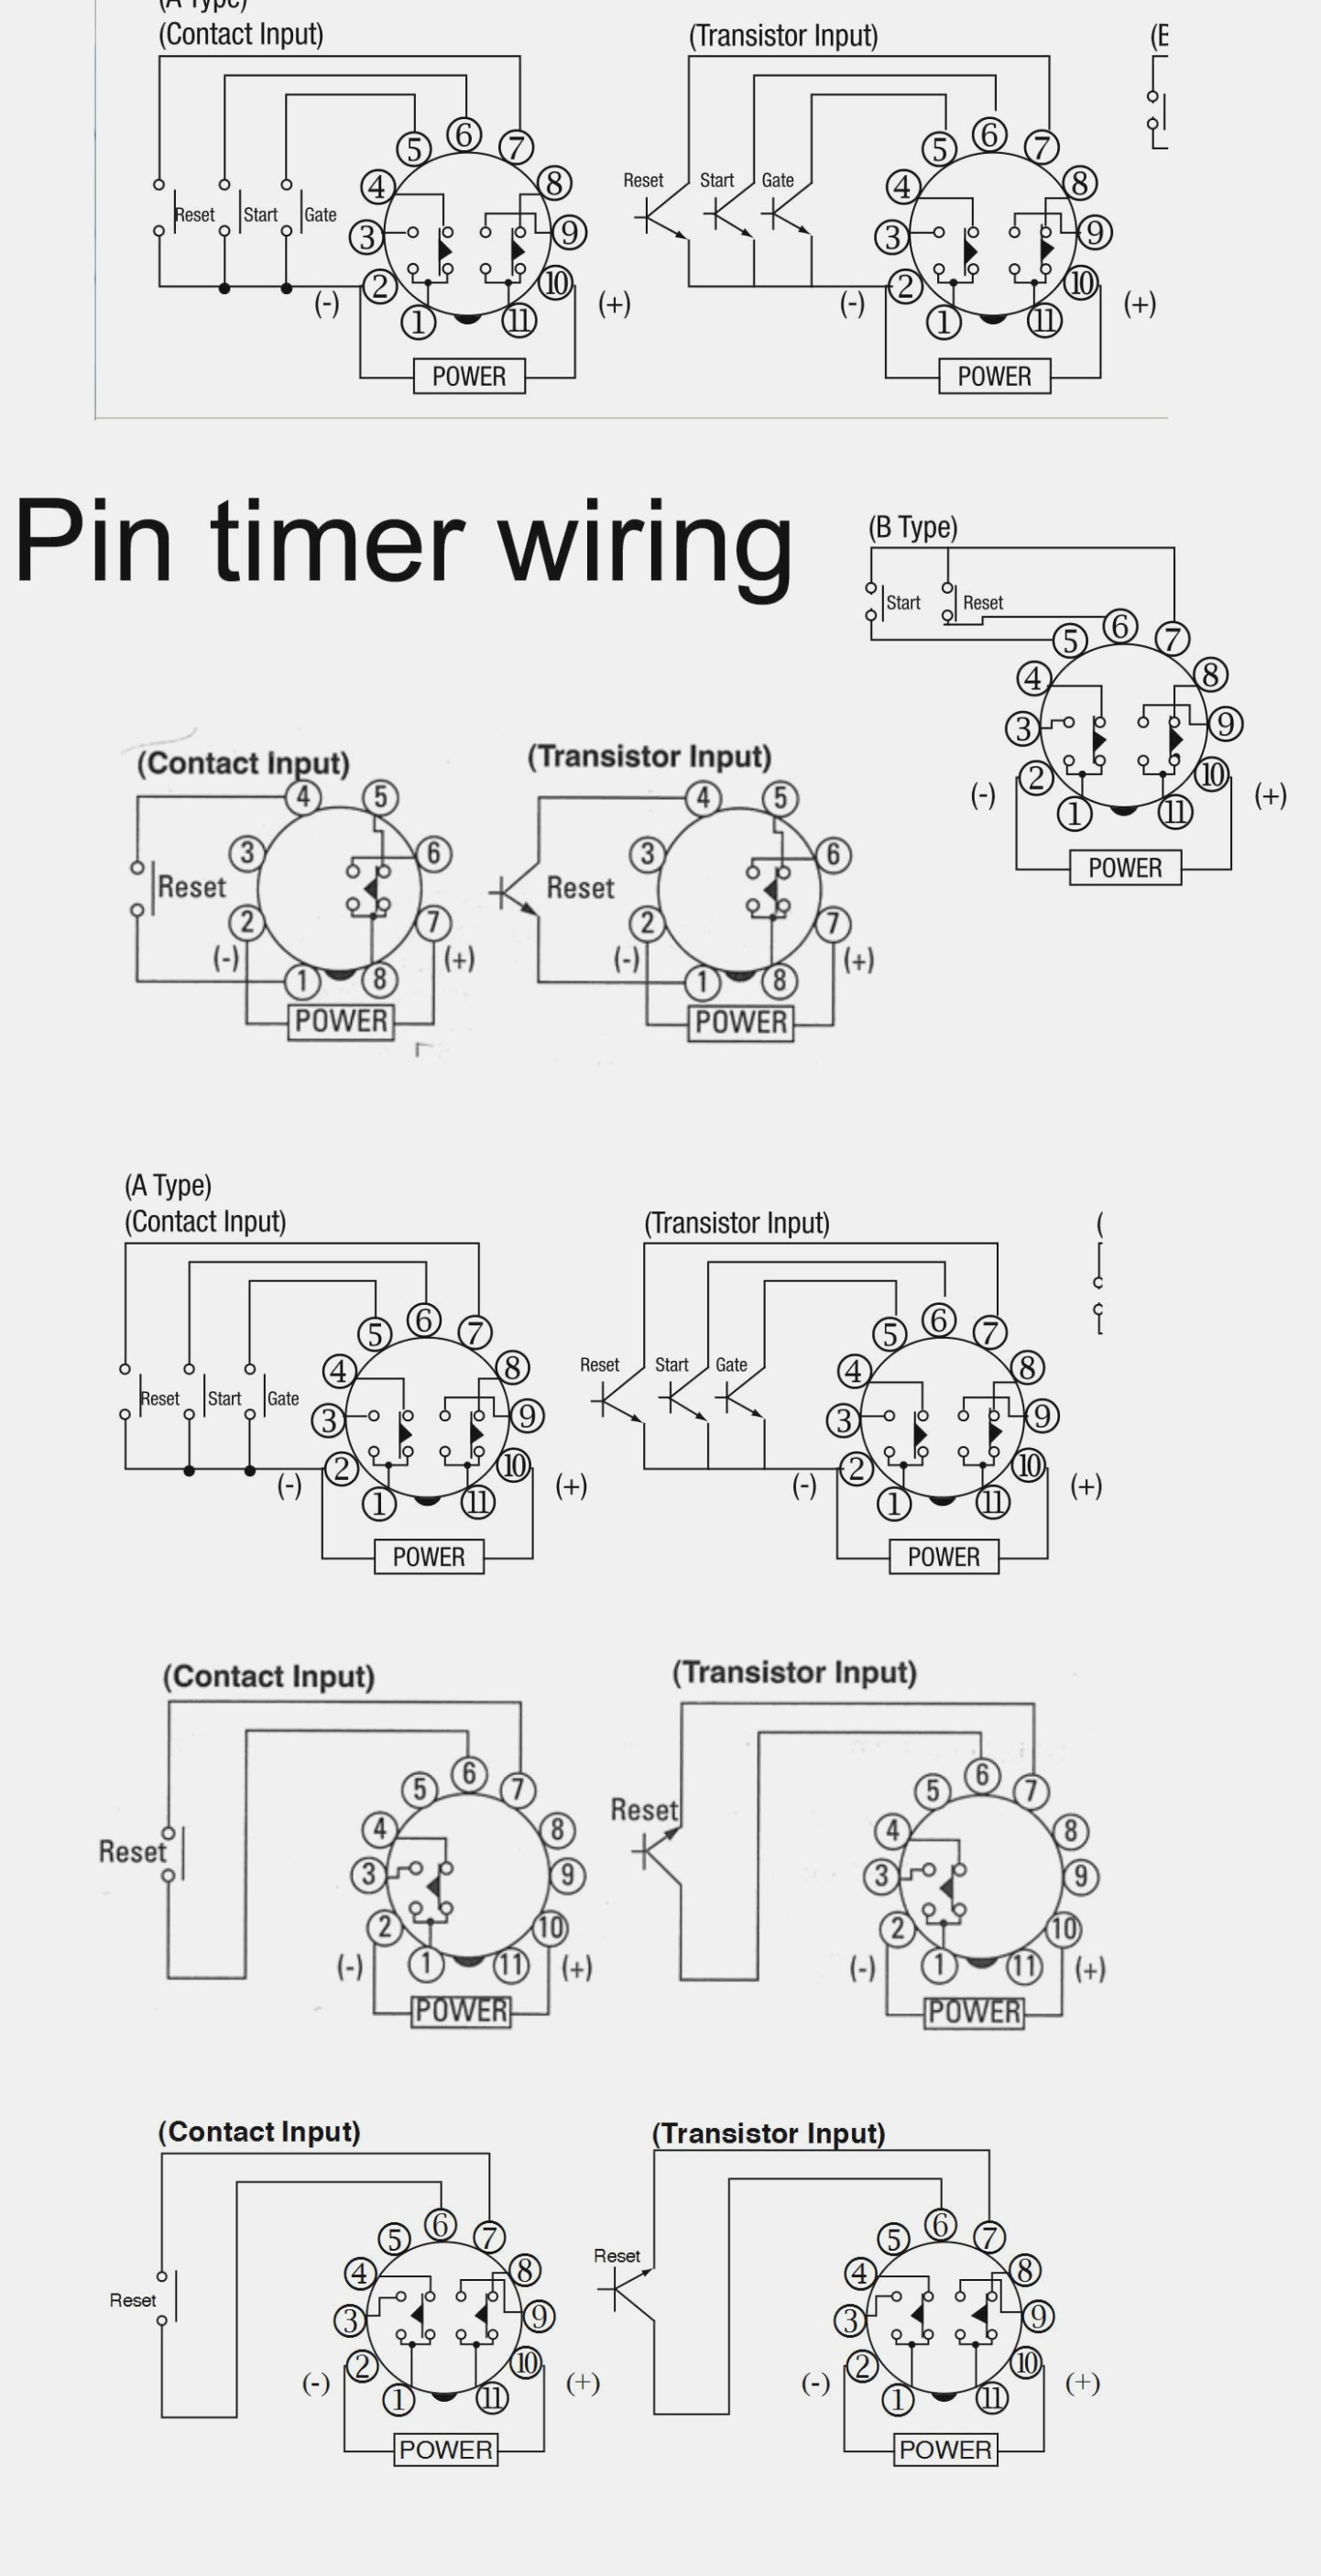 Time Delay Relay Wiring Diagram 11 Pin Relay Schematic Diagram Of Time Delay Relay Wiring Diagram